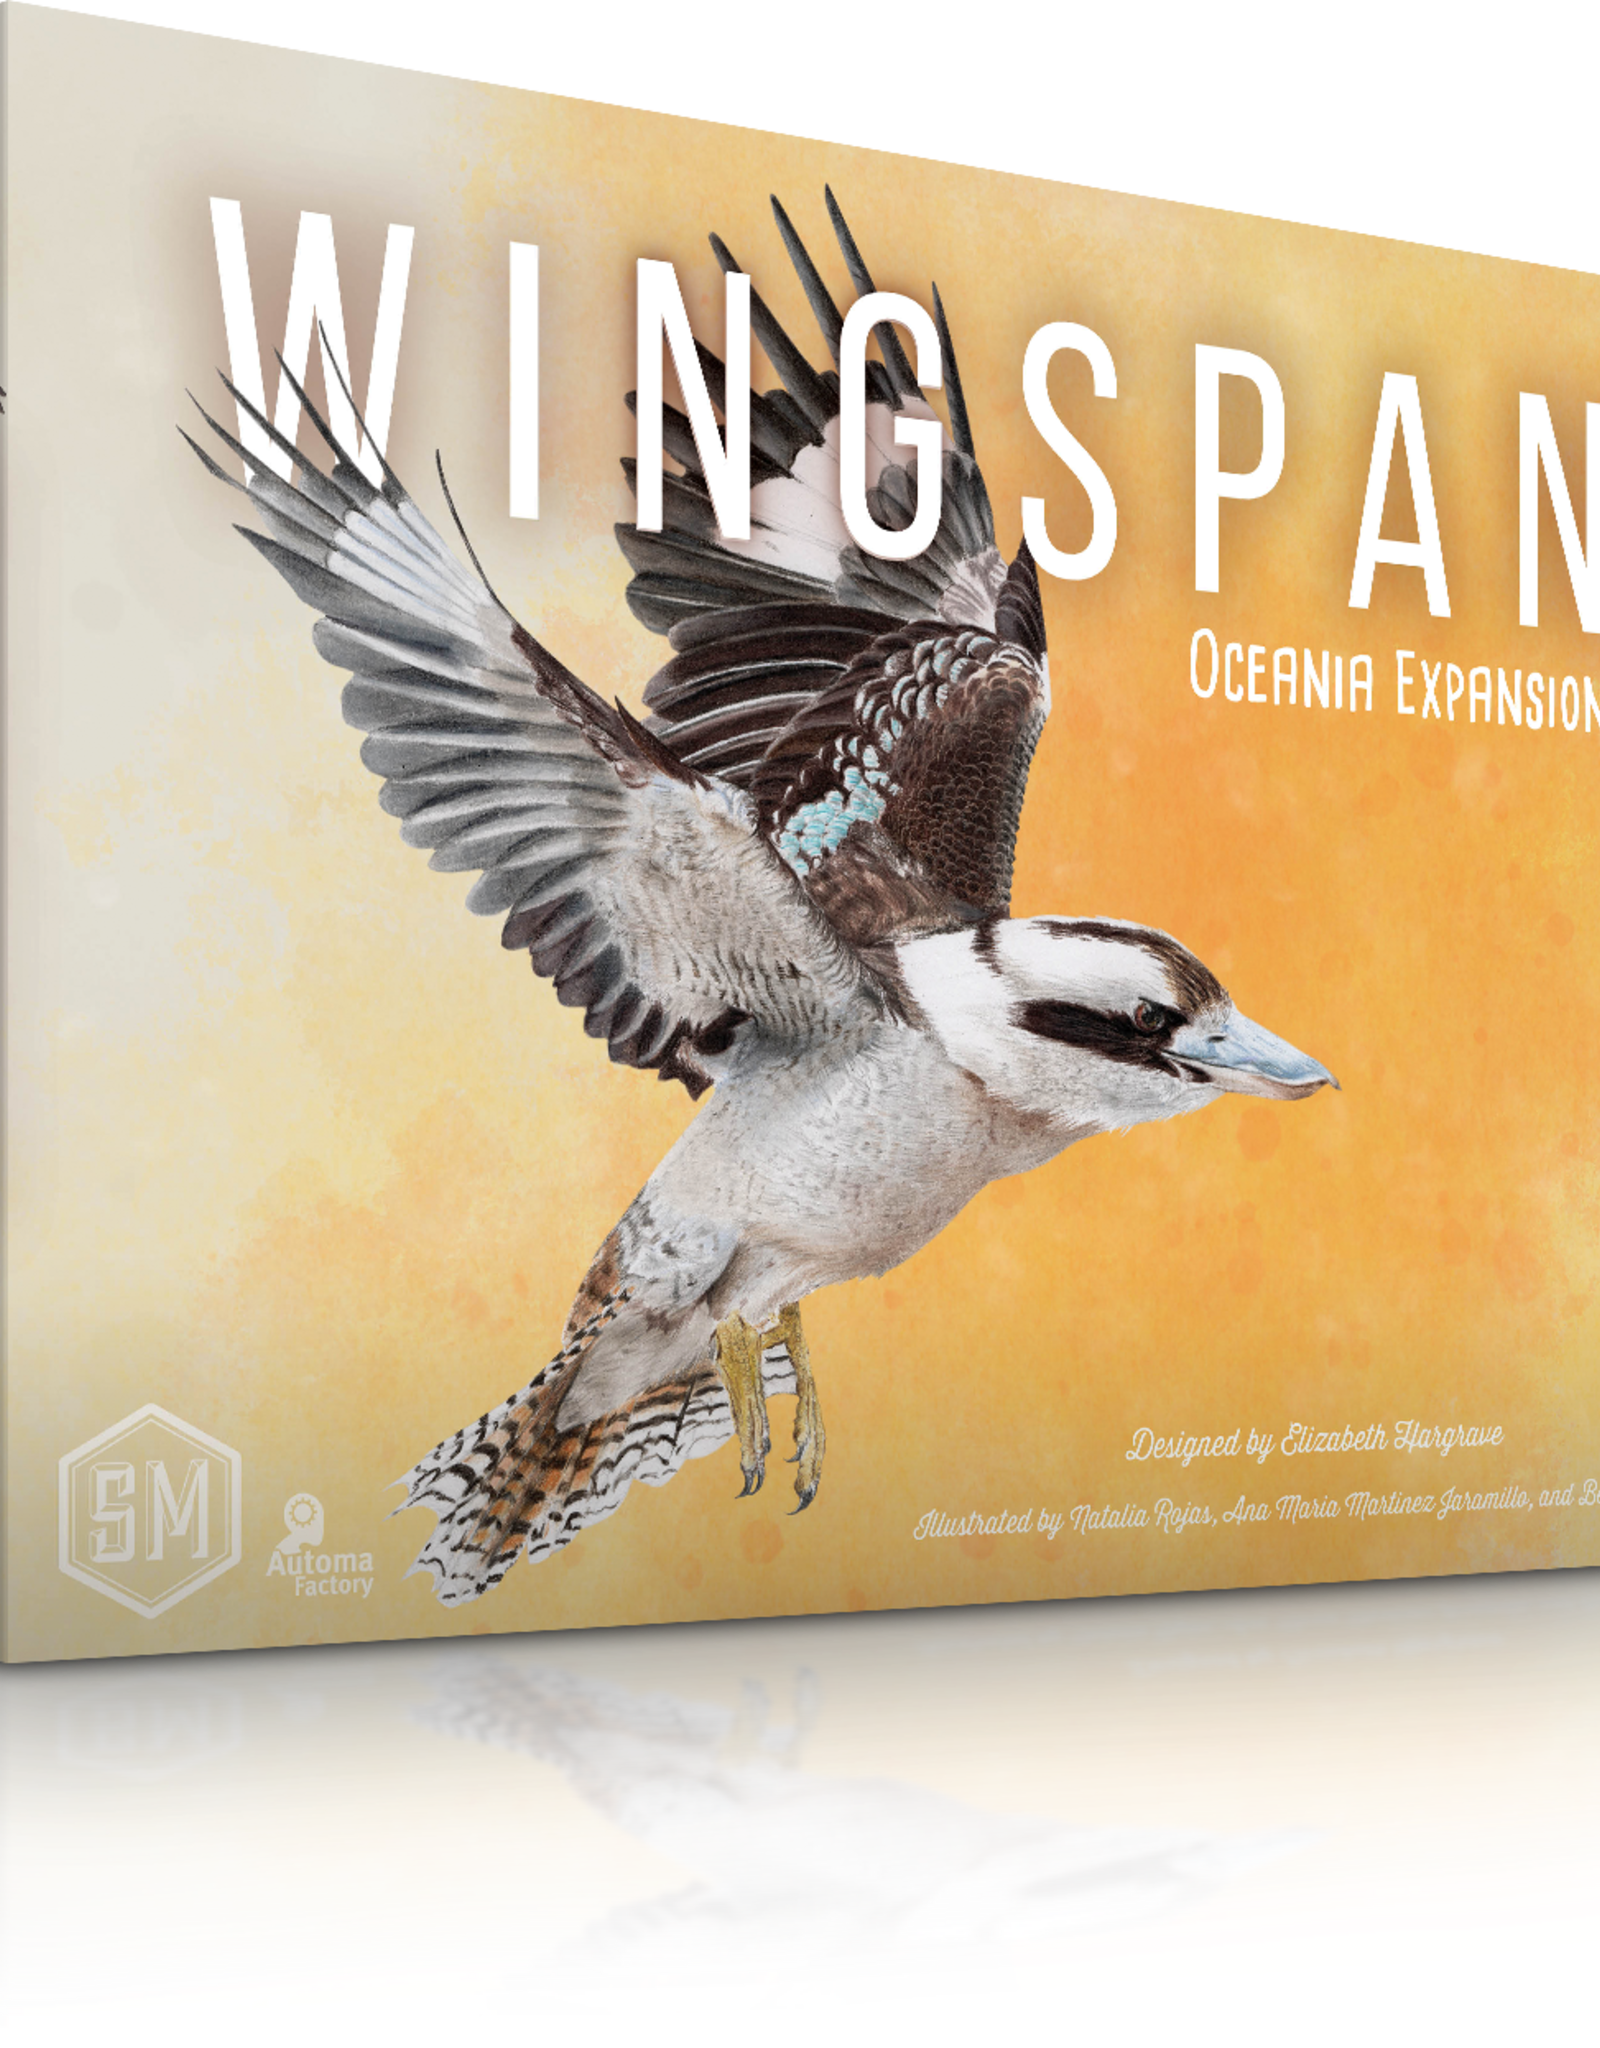 StoneMaier games Wingspan Oceania Expansion